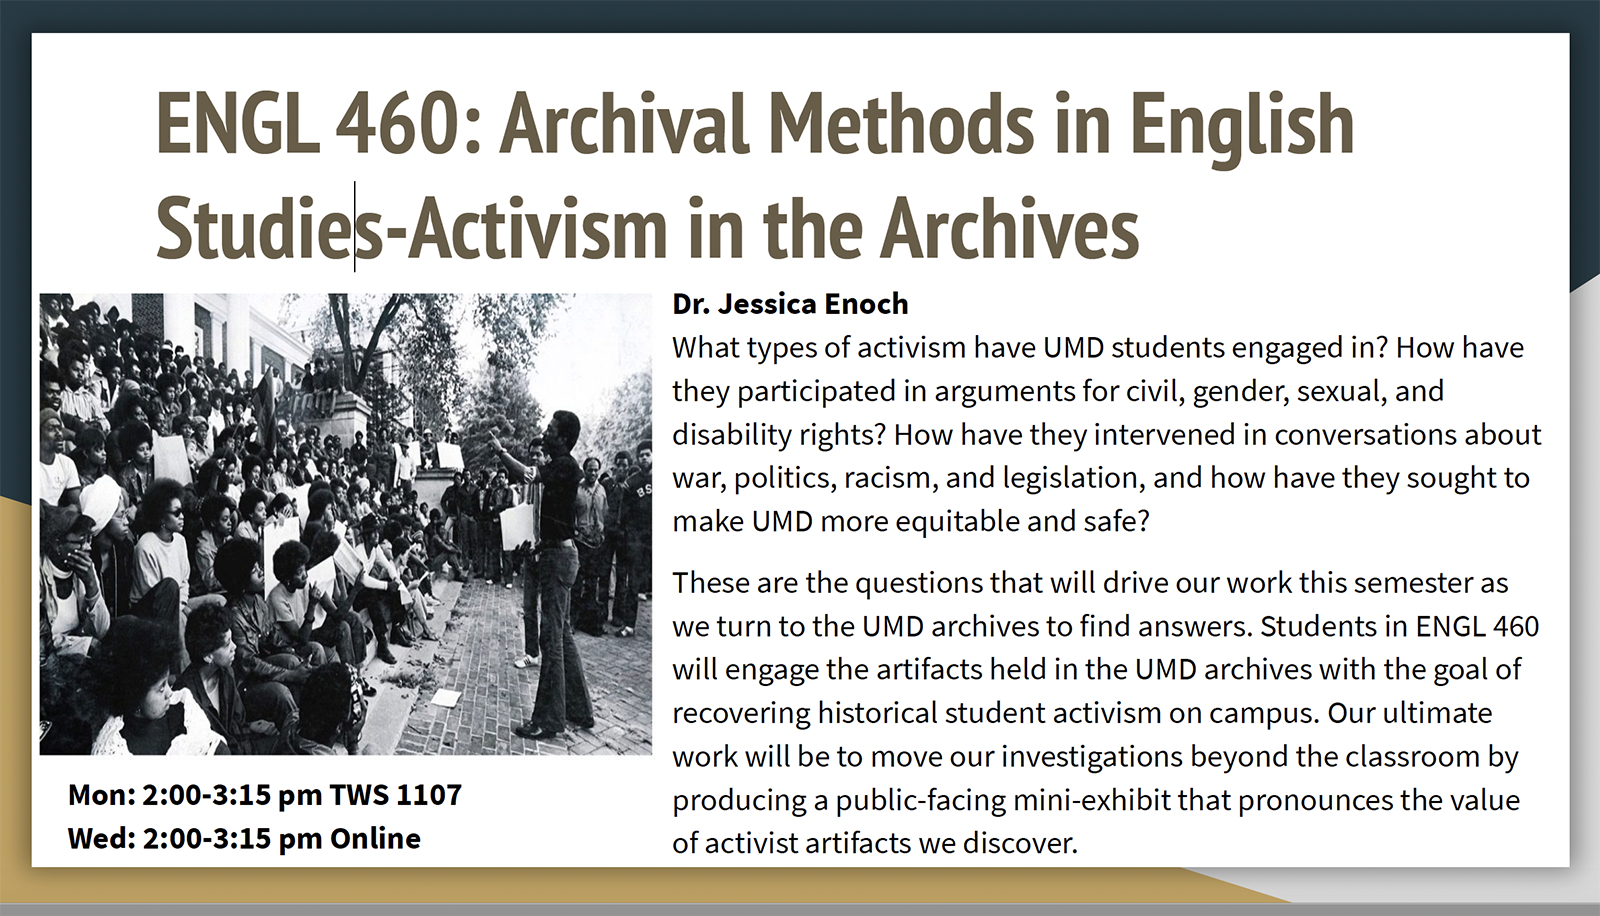 What types of activism have UMD students engaged in? How have they participated in arguments for civil, gender, sexual, and disability rights? How have they intervened in conversations about war, politics, racism, and legislation and, how have they sought to make UMD more equitable and safe?